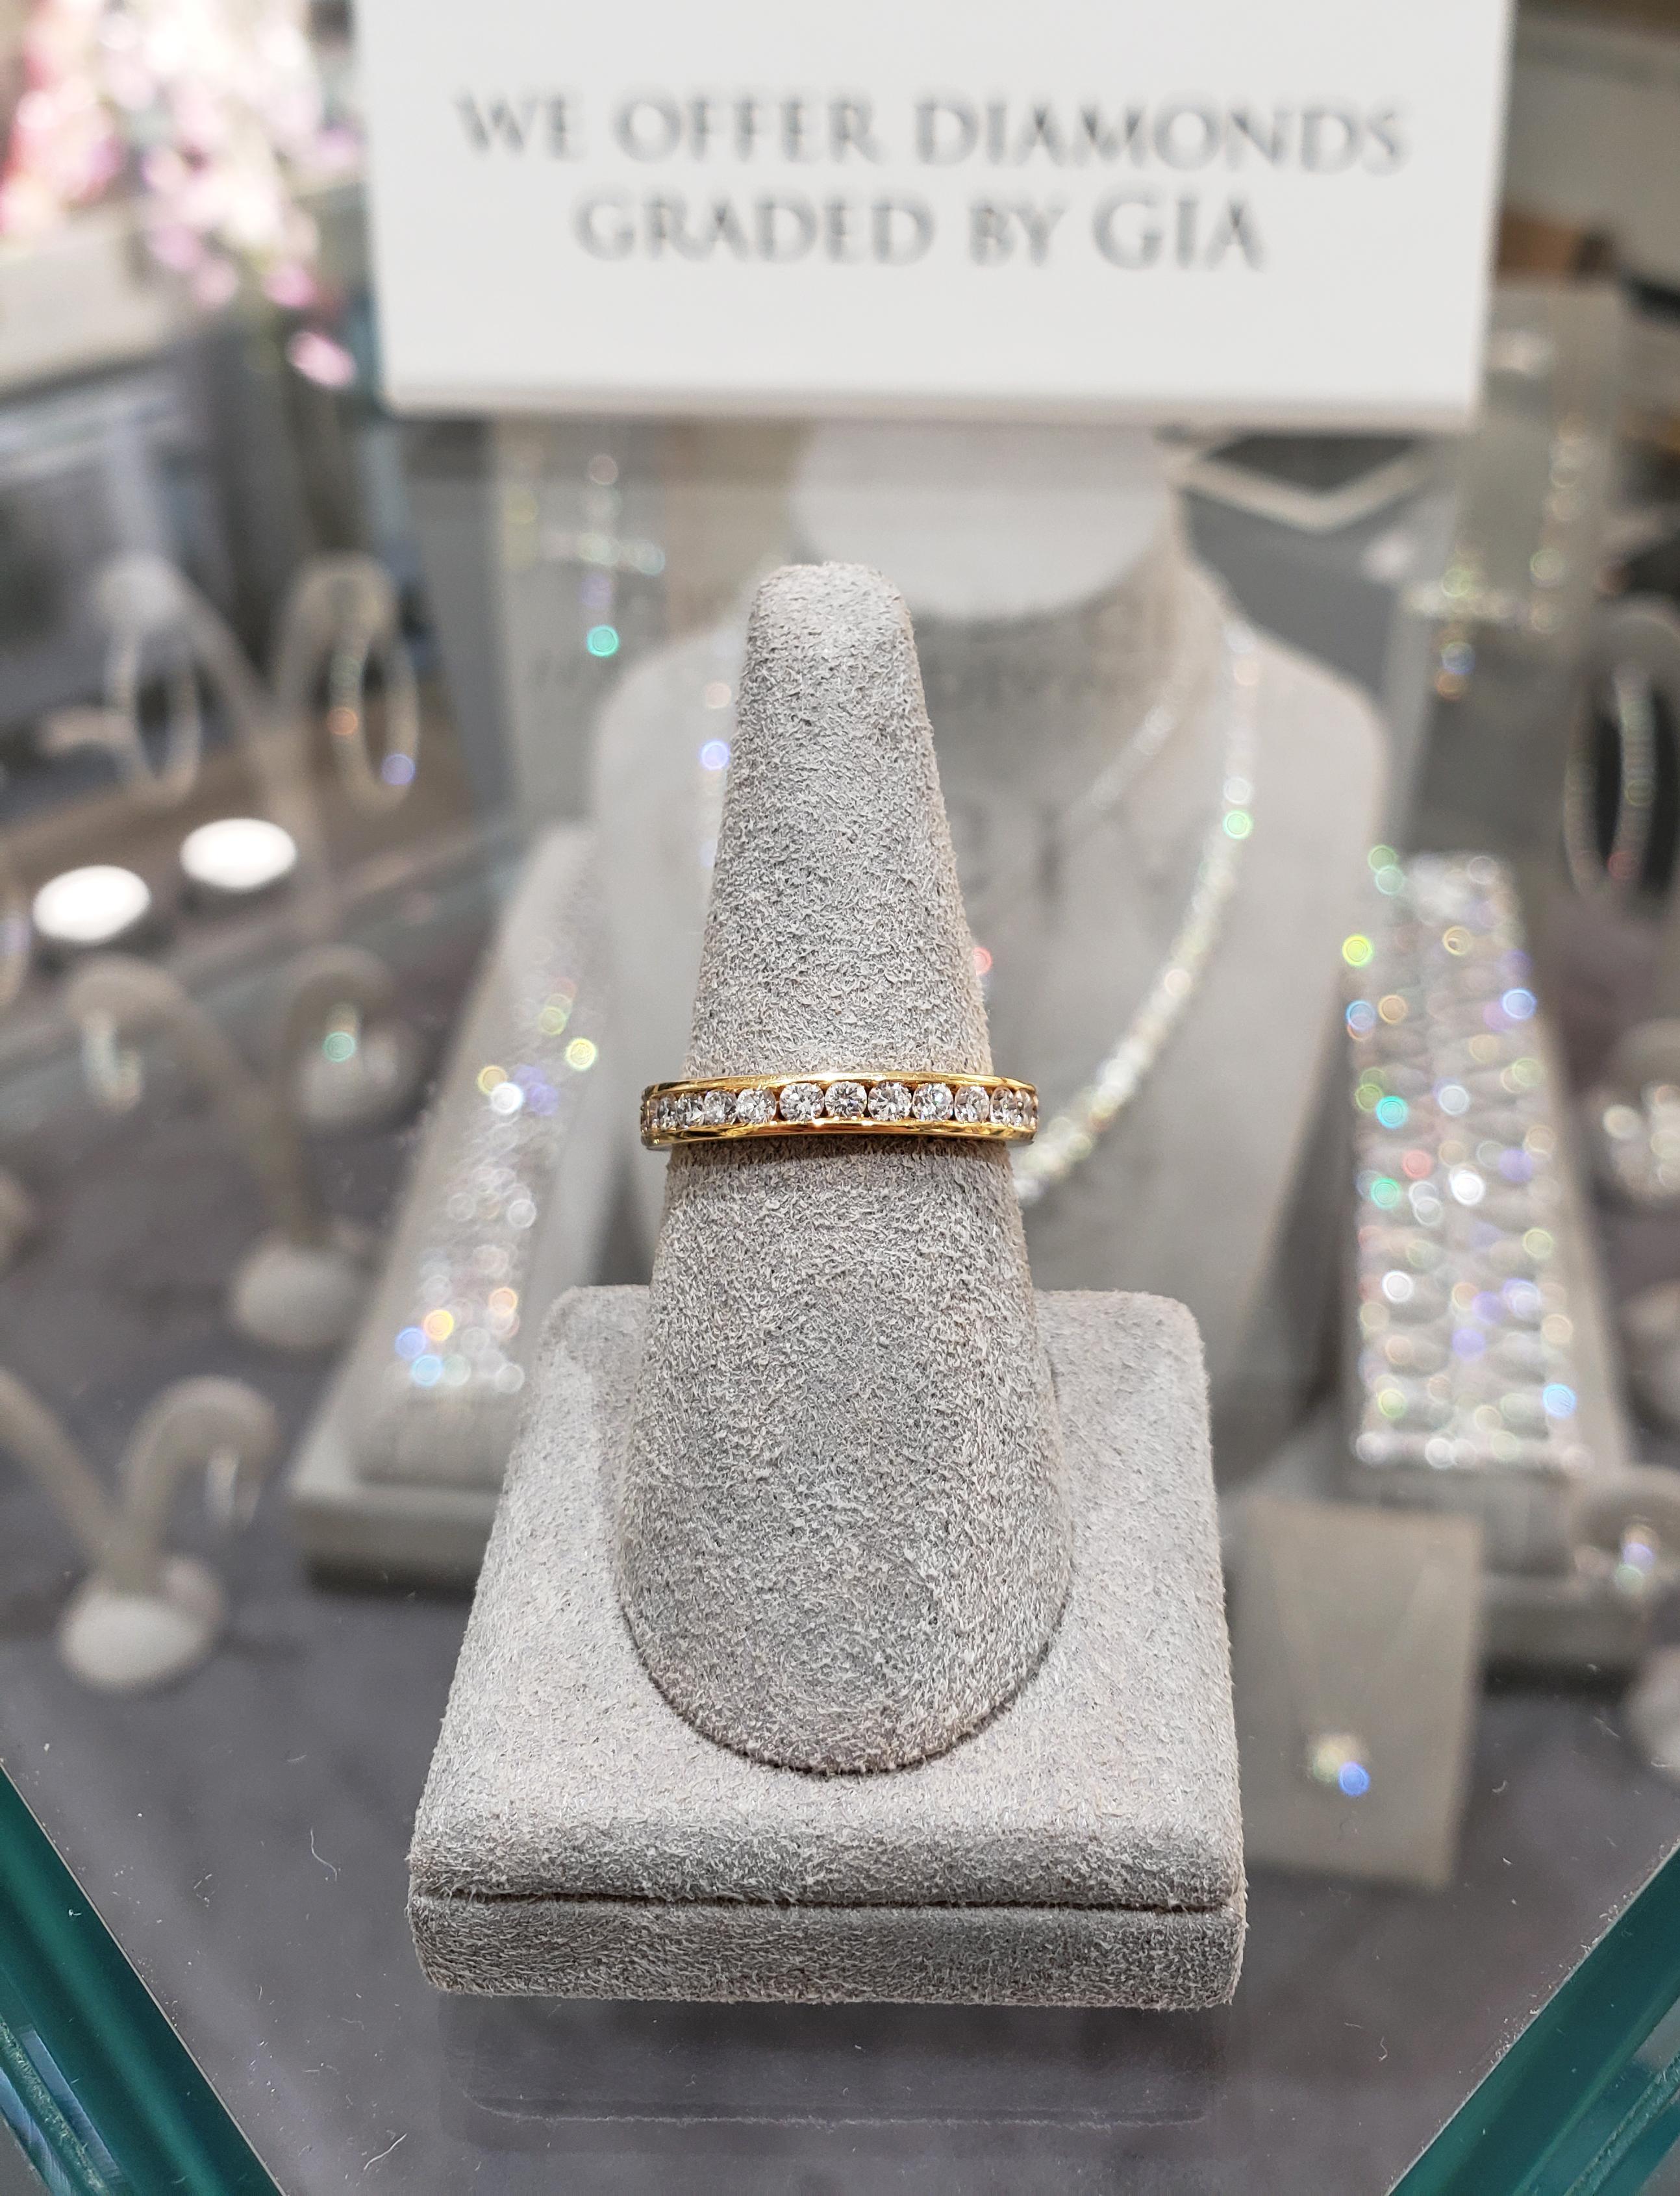 A modern eternity wedding band showcasing brilliant diamonds, Diamonds weigh 1.08 carats total. Channel set Made with 18K Yellow Gold. Size 5.25 US

Roman Malakov is a custom house, specializing in creating anything you can imagine. If you would